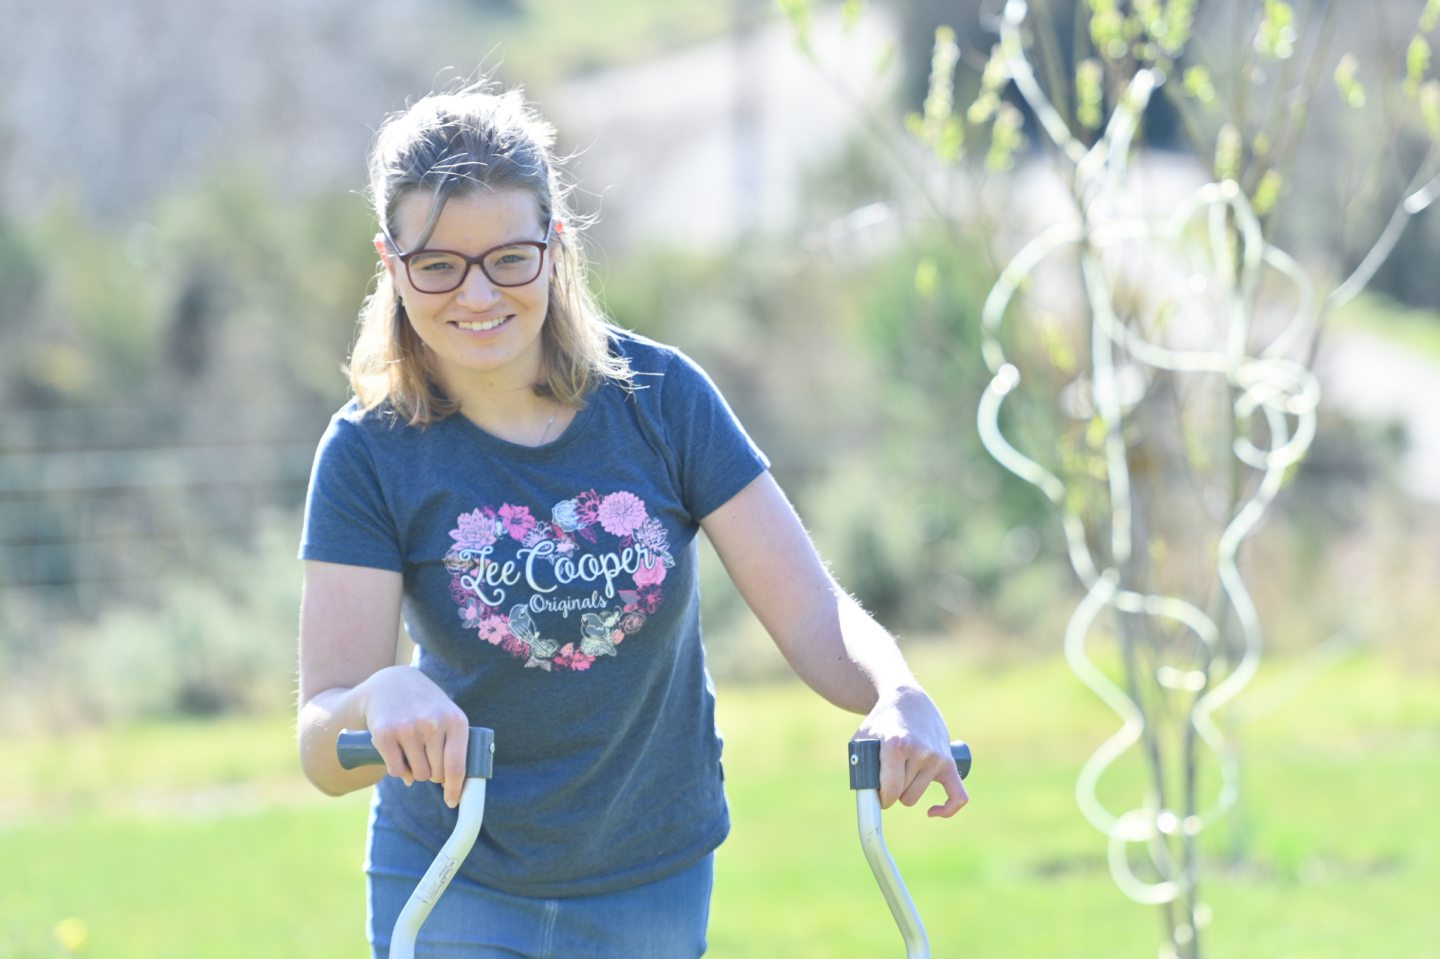 Martyna uses two tripod crutches to help her get about. Image: Jason Hedges/DC Thomson